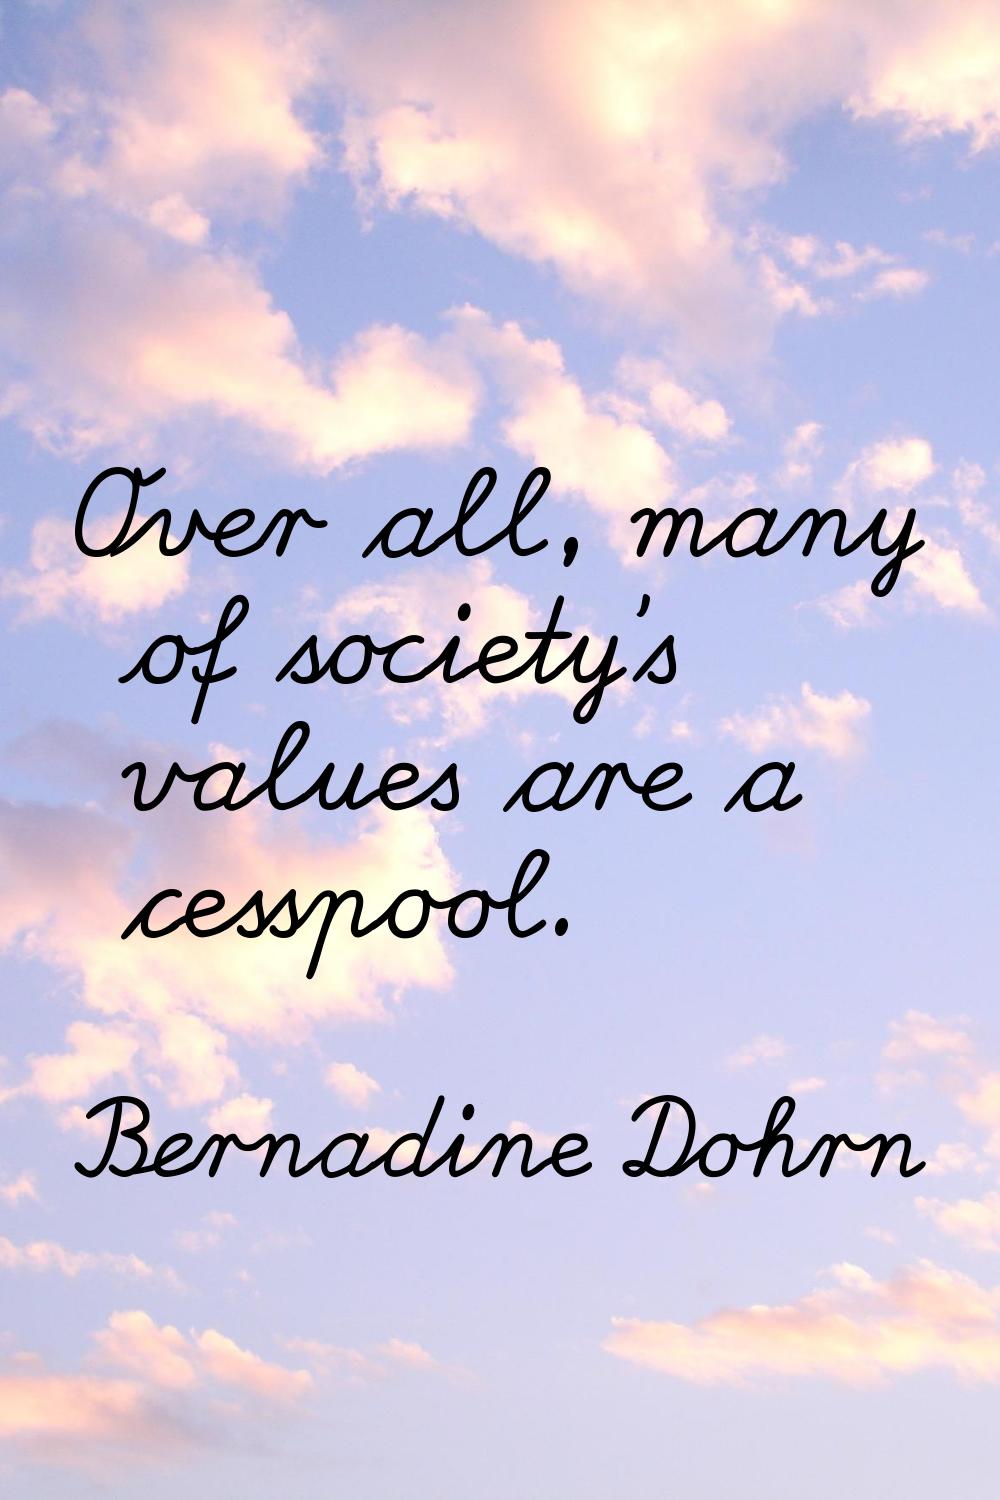 Over all, many of society's values are a cesspool.